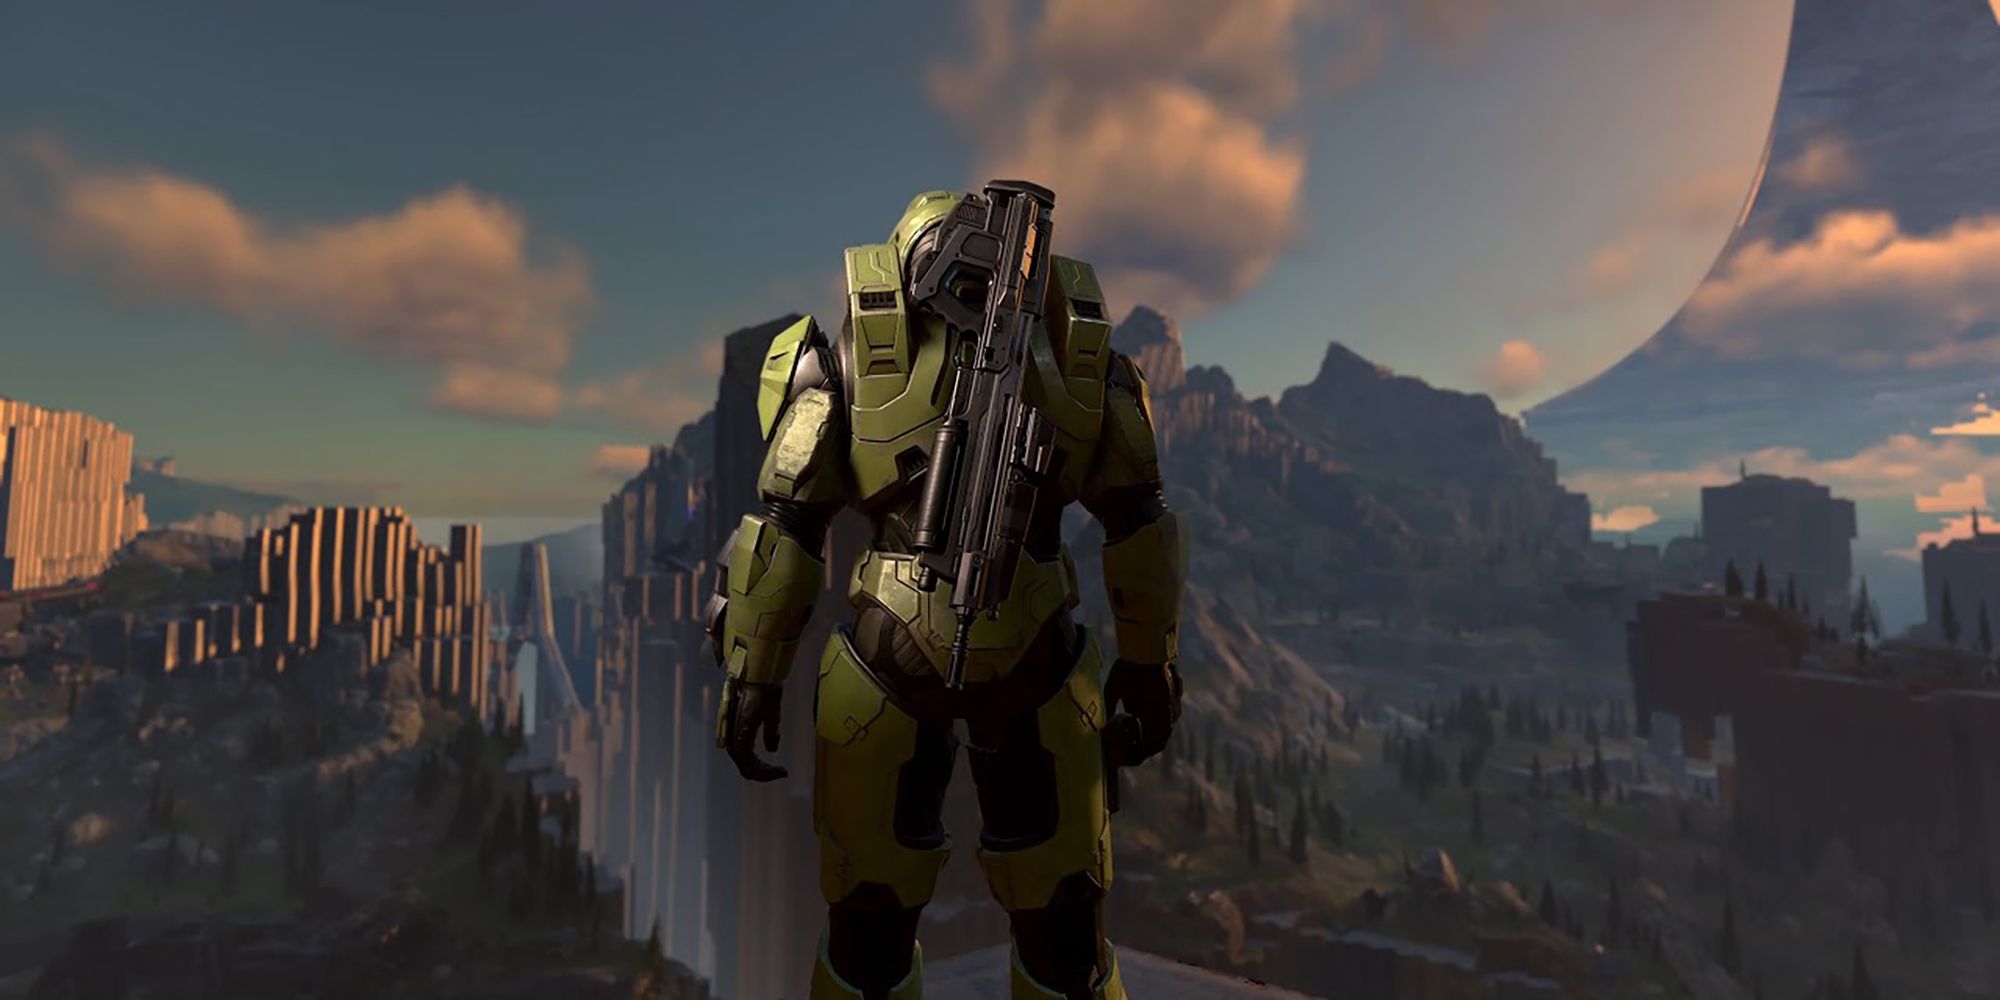 Halo Infinite - Master Chief Looking Out At The Open World In Front Of Him